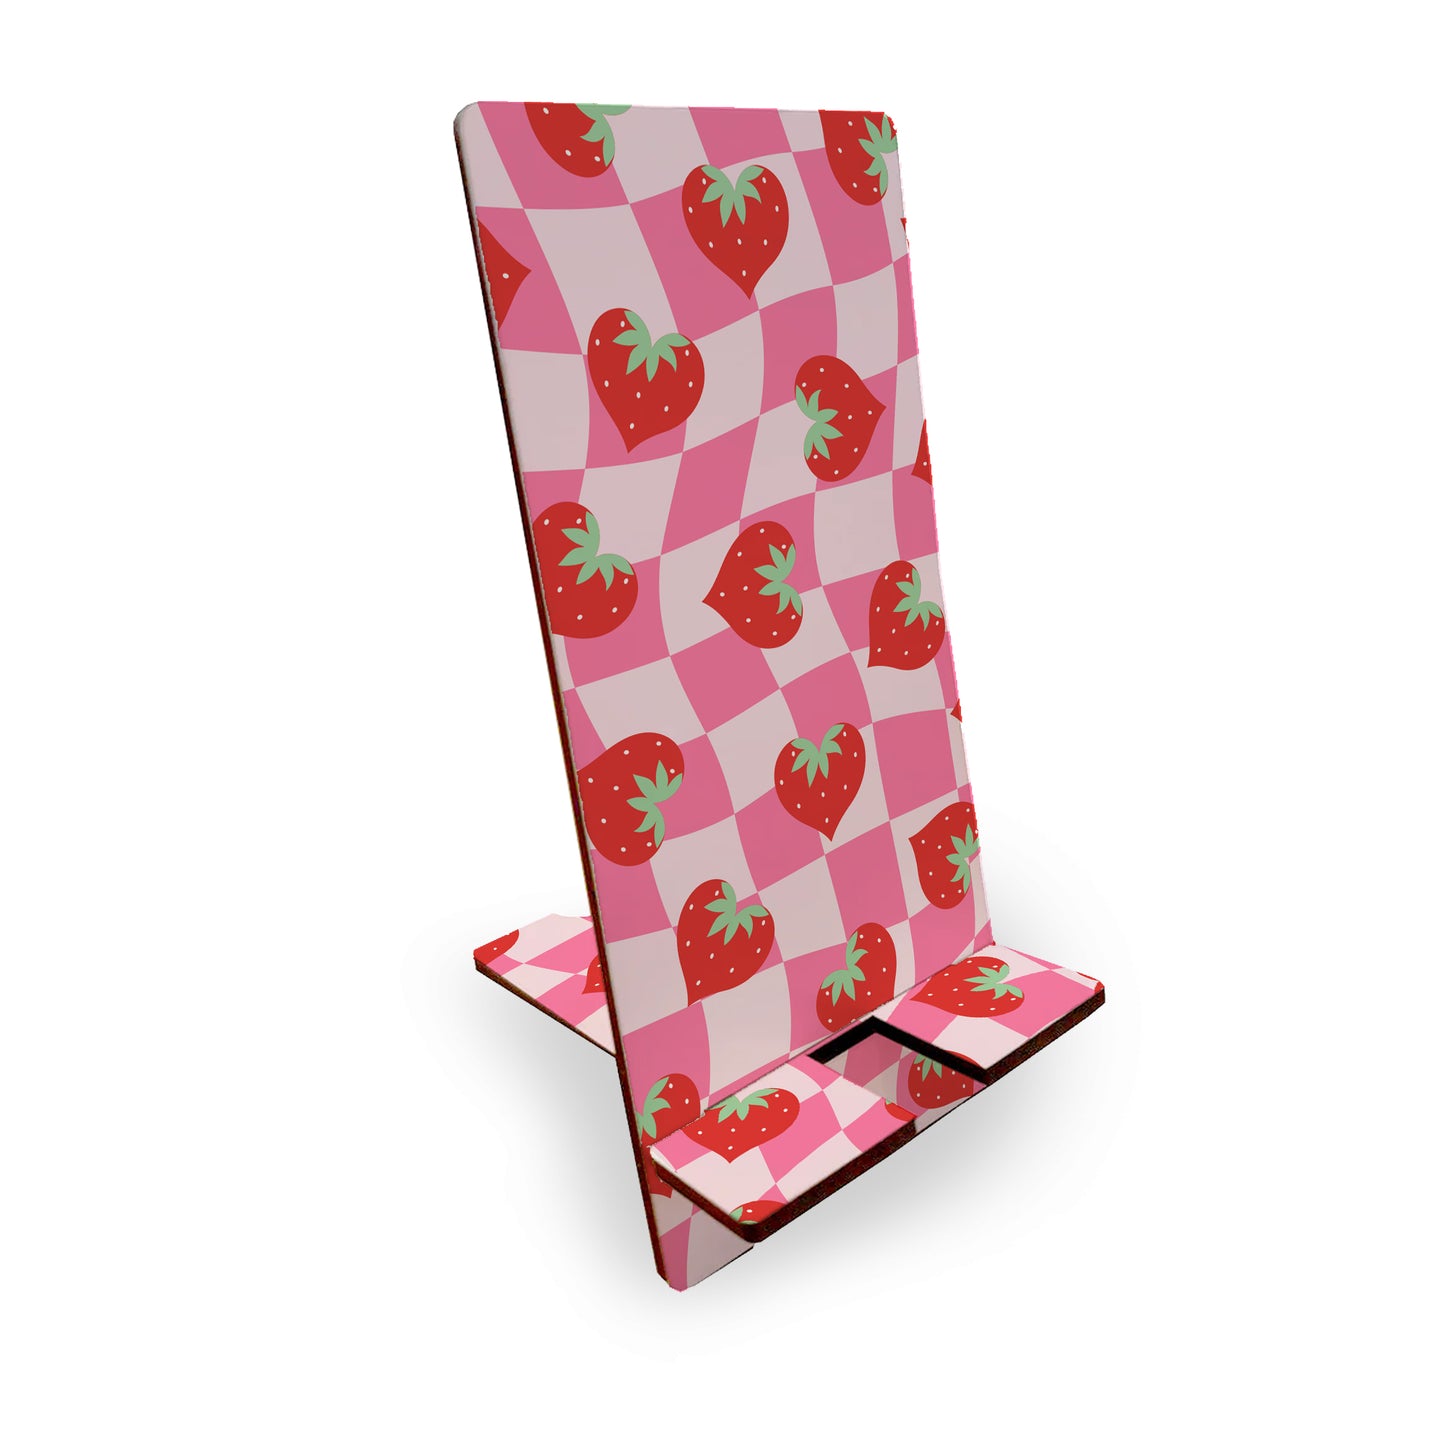 STRAWBERRY KISSES MOBILE PHONE STAND